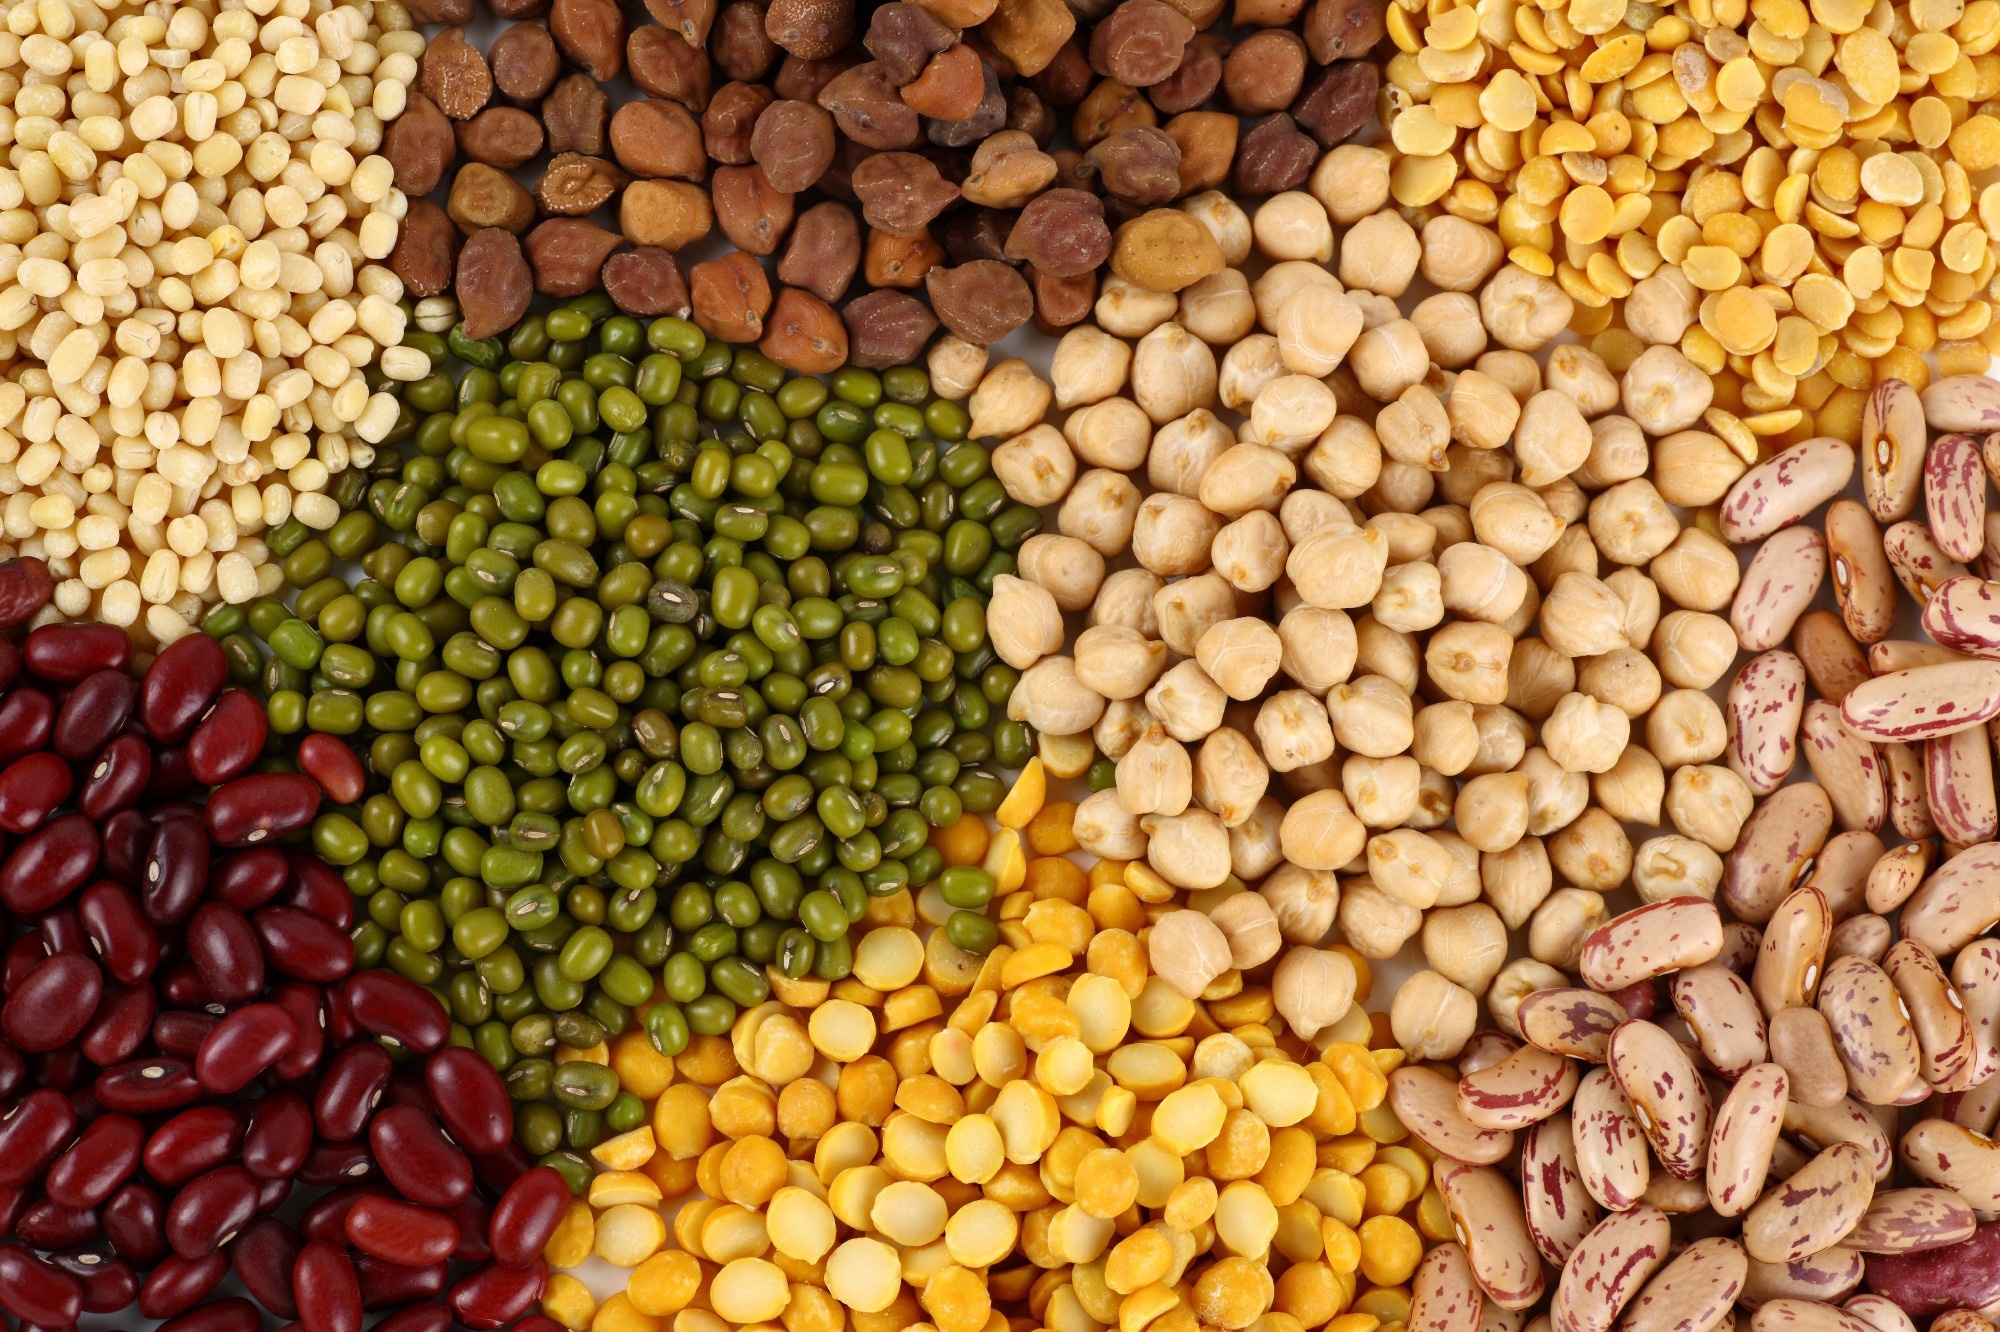 Study finds plant proteins improve rest, animal proteins may disrupt